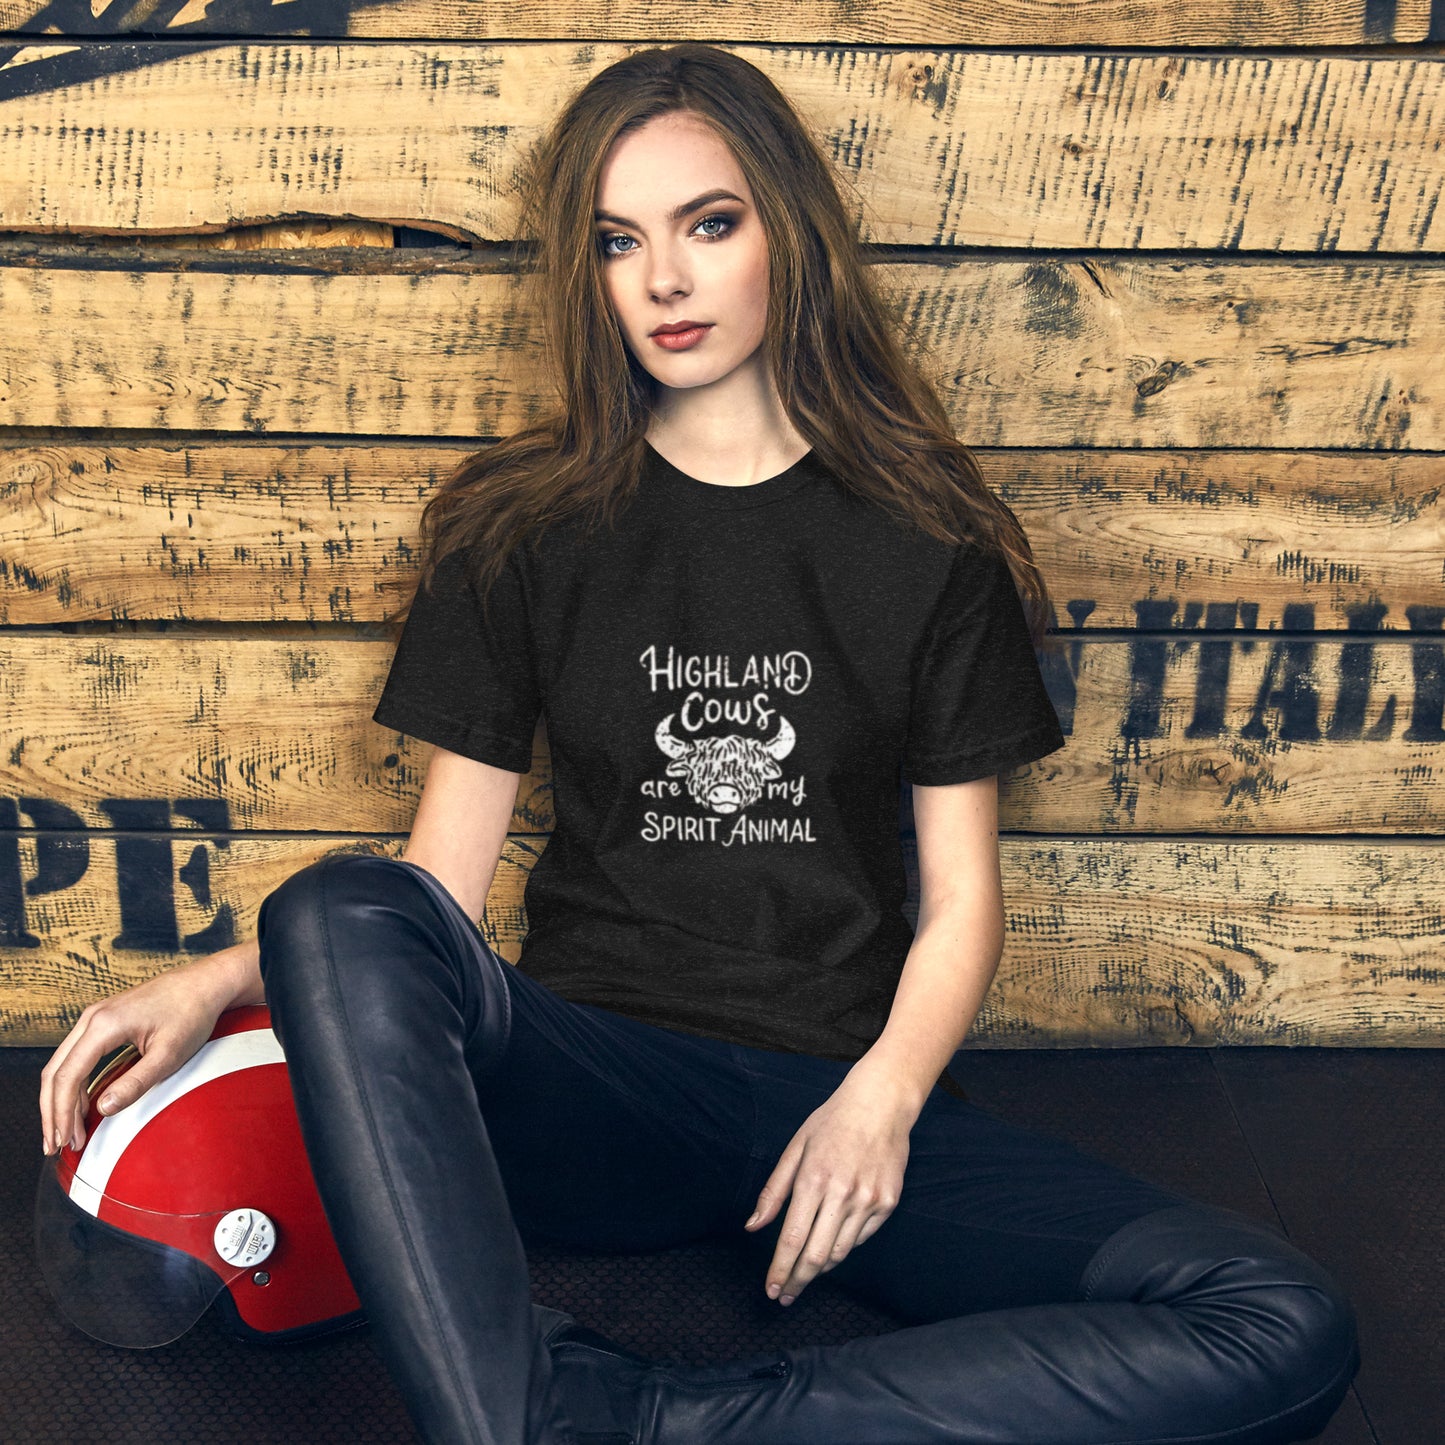 Highland Cows - Classic Country Tees